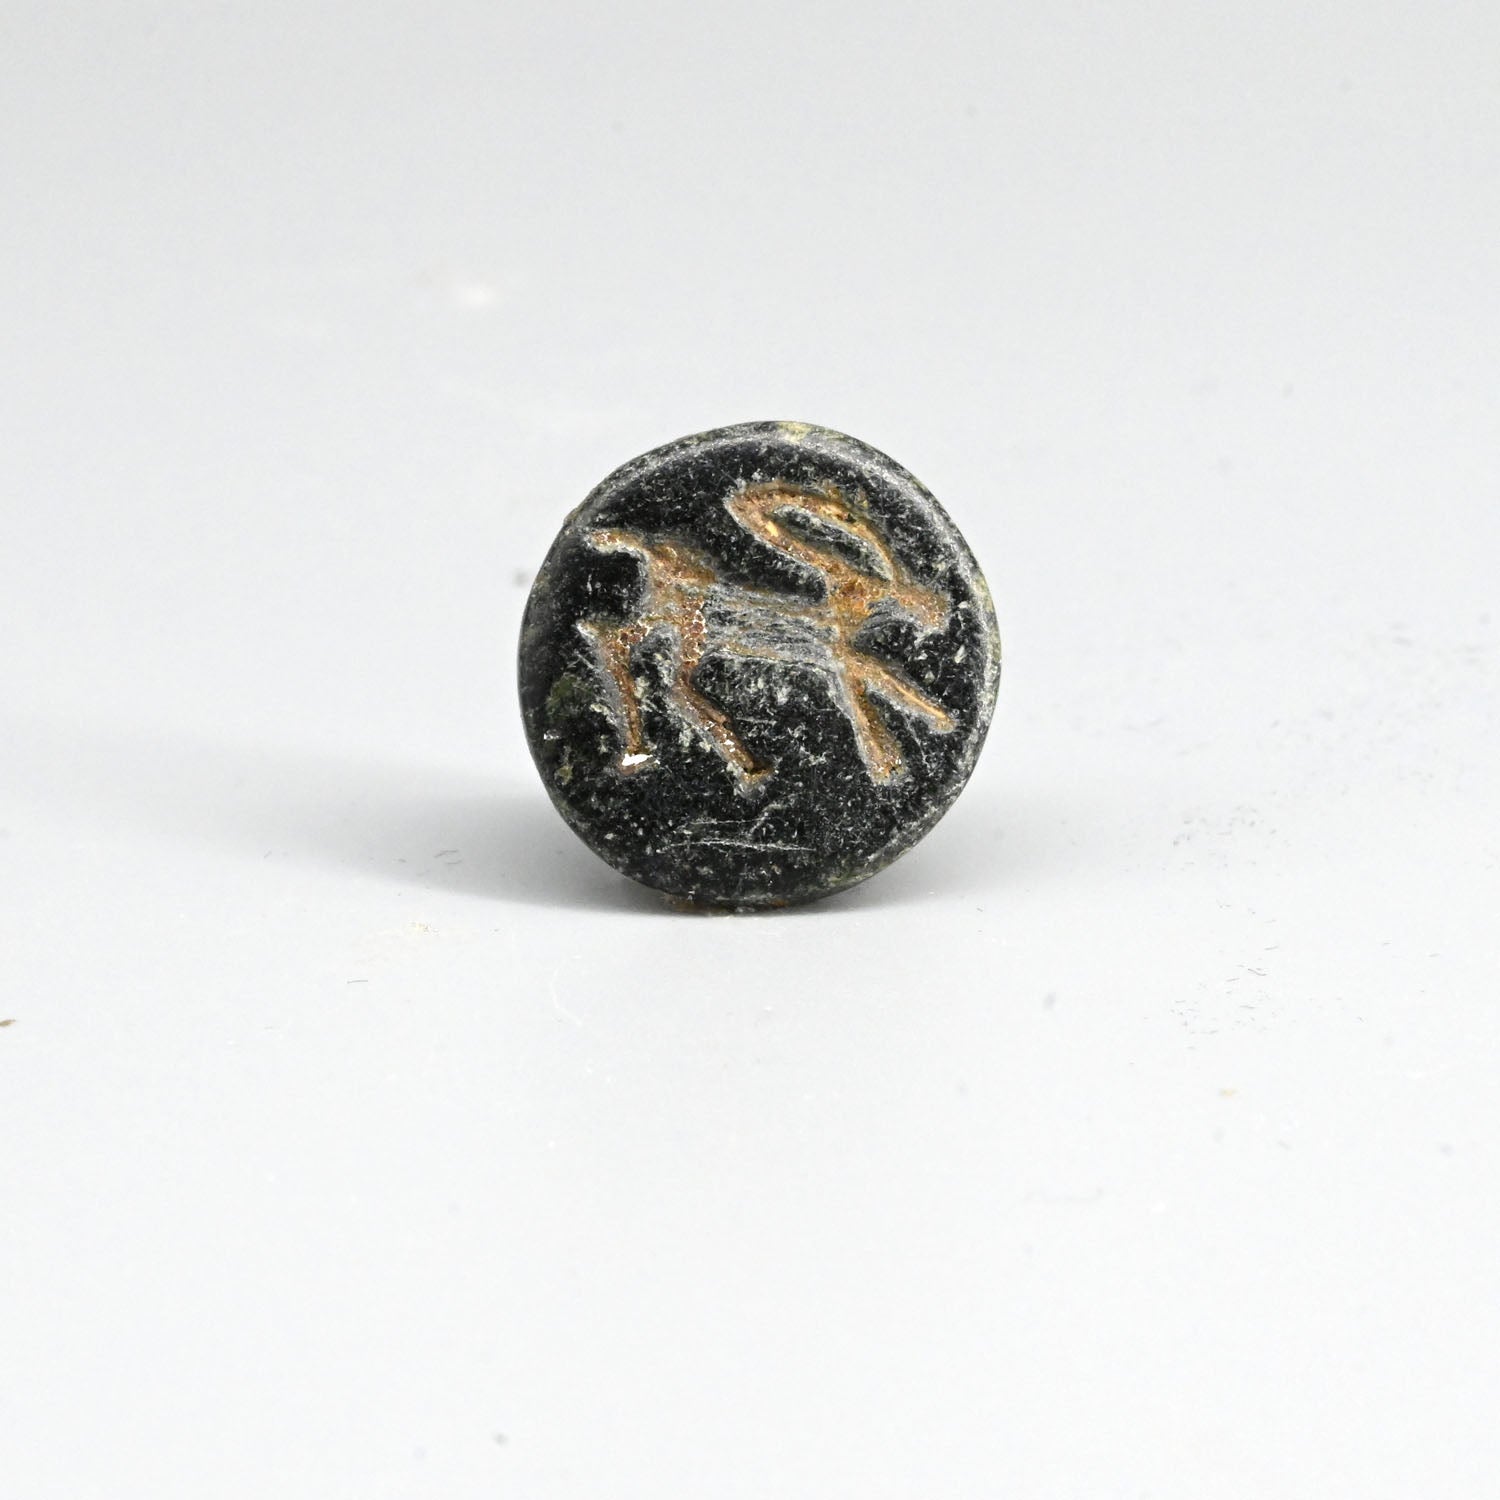 A Northern Mesopotamian Serpentine Dome Seal, Late Gawra Period, 3500 - 3000 BCE